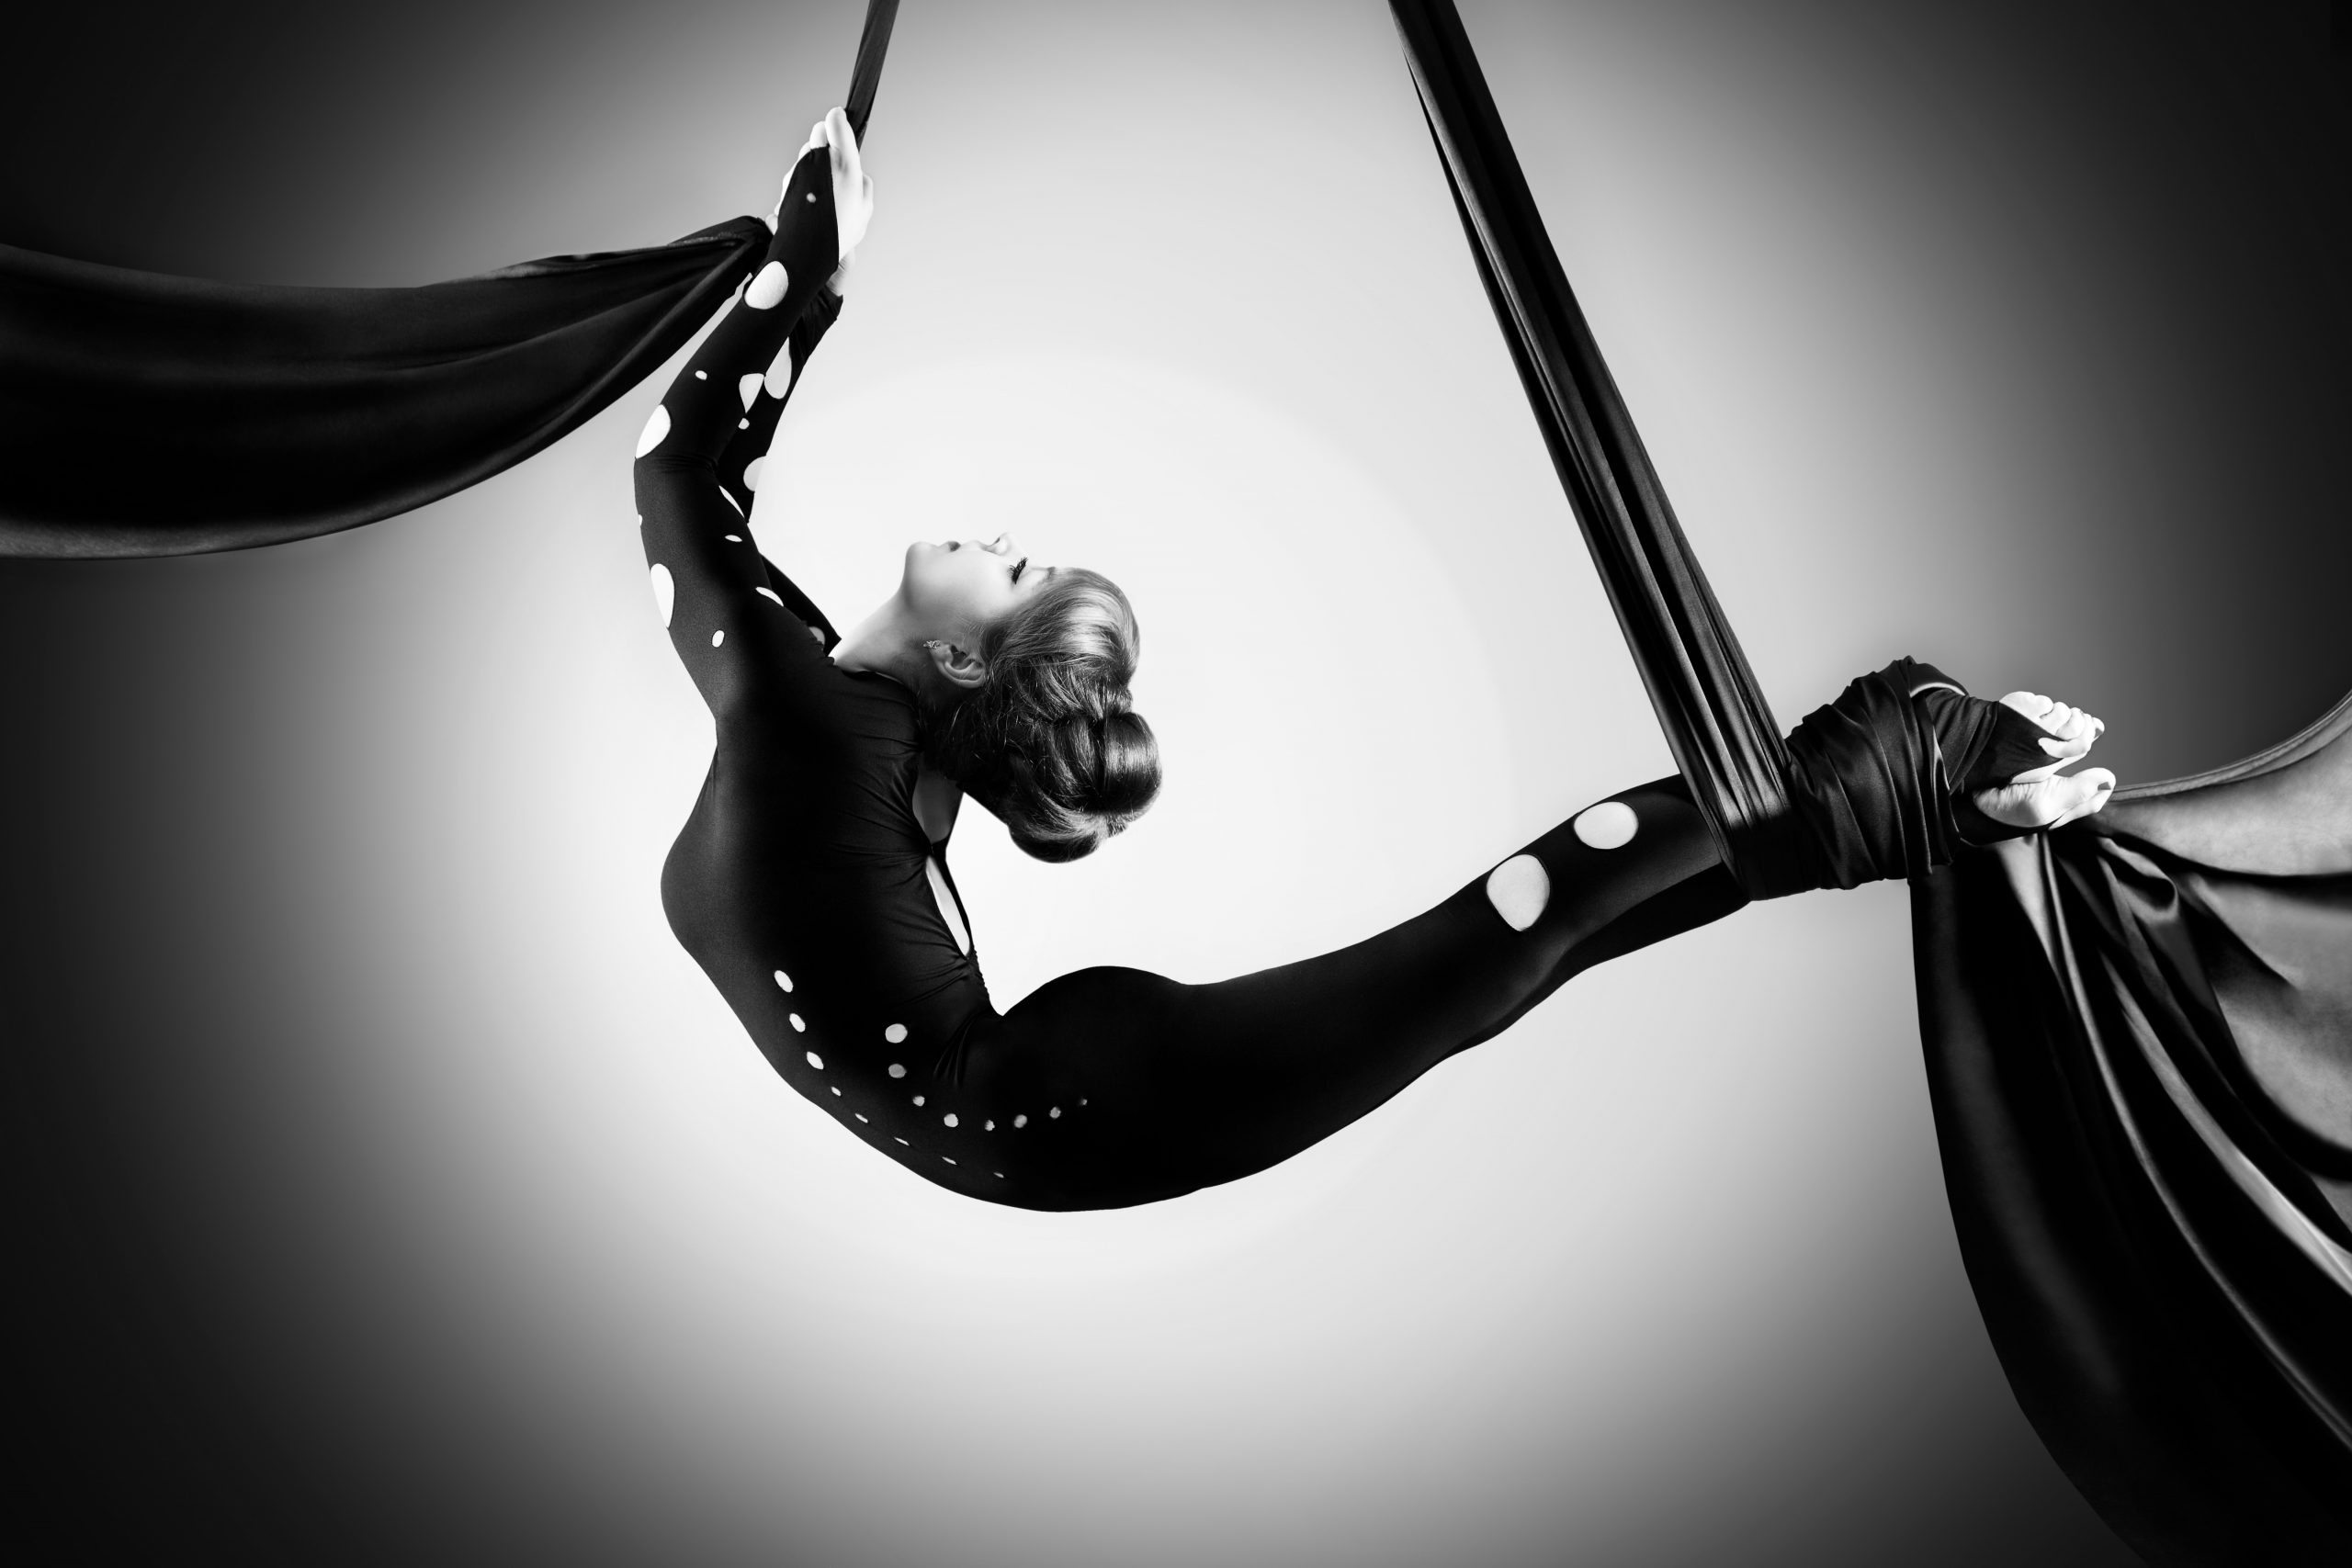 Aerial Silks: A monochrome female dancer performs in the air with the use of fabric. 2560x1710 HD Wallpaper.